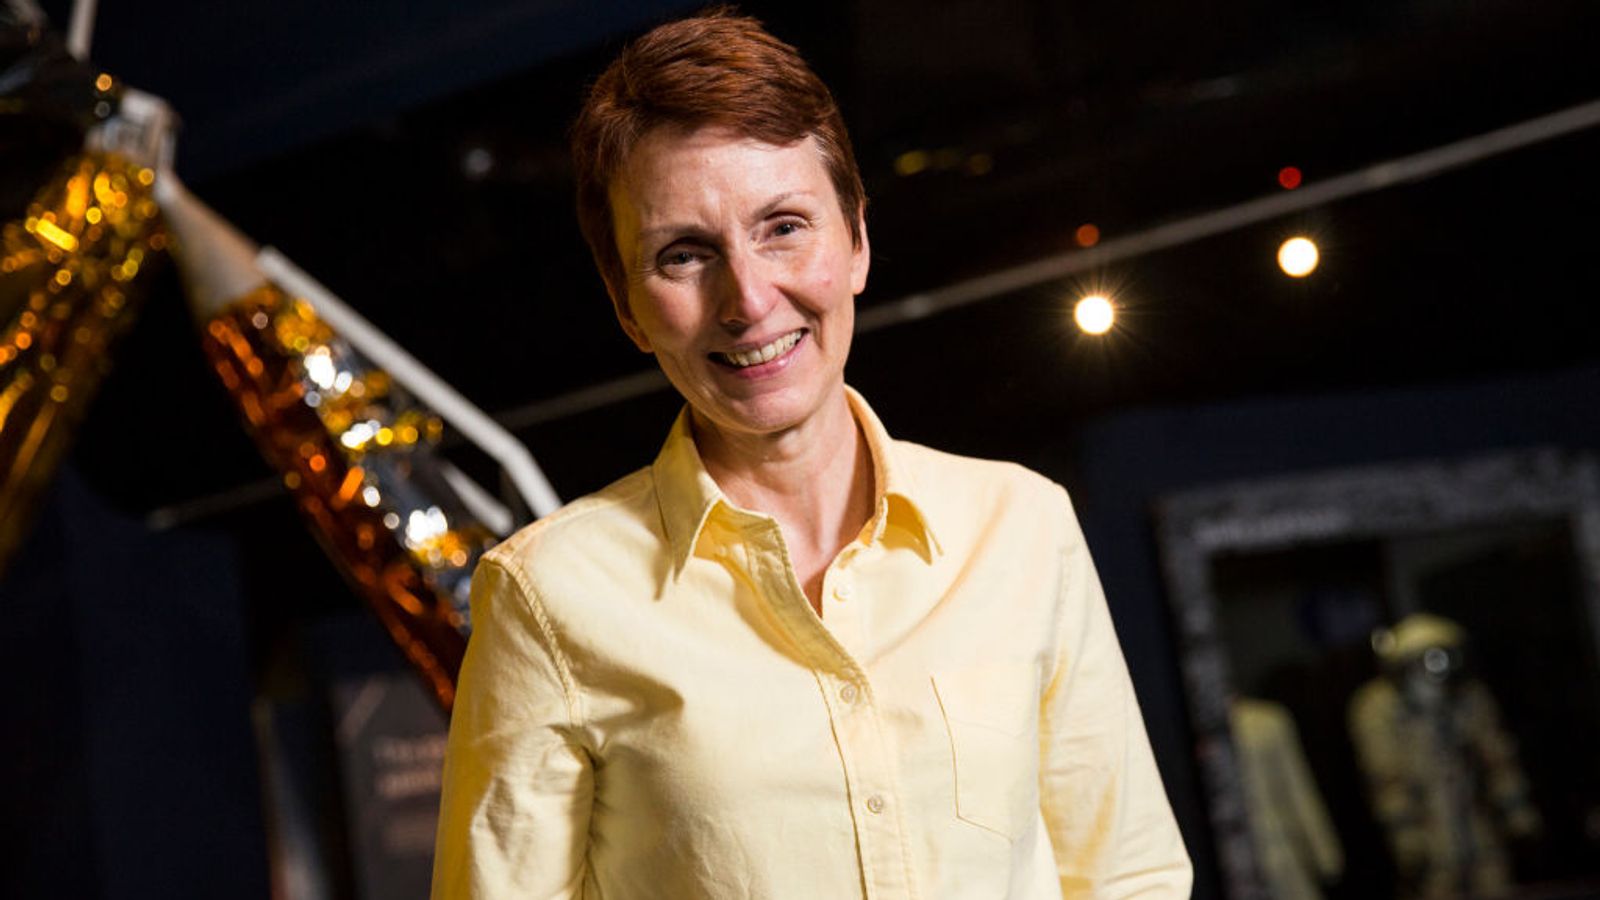 Aliens exist and could already be on earth, first British astronaut says